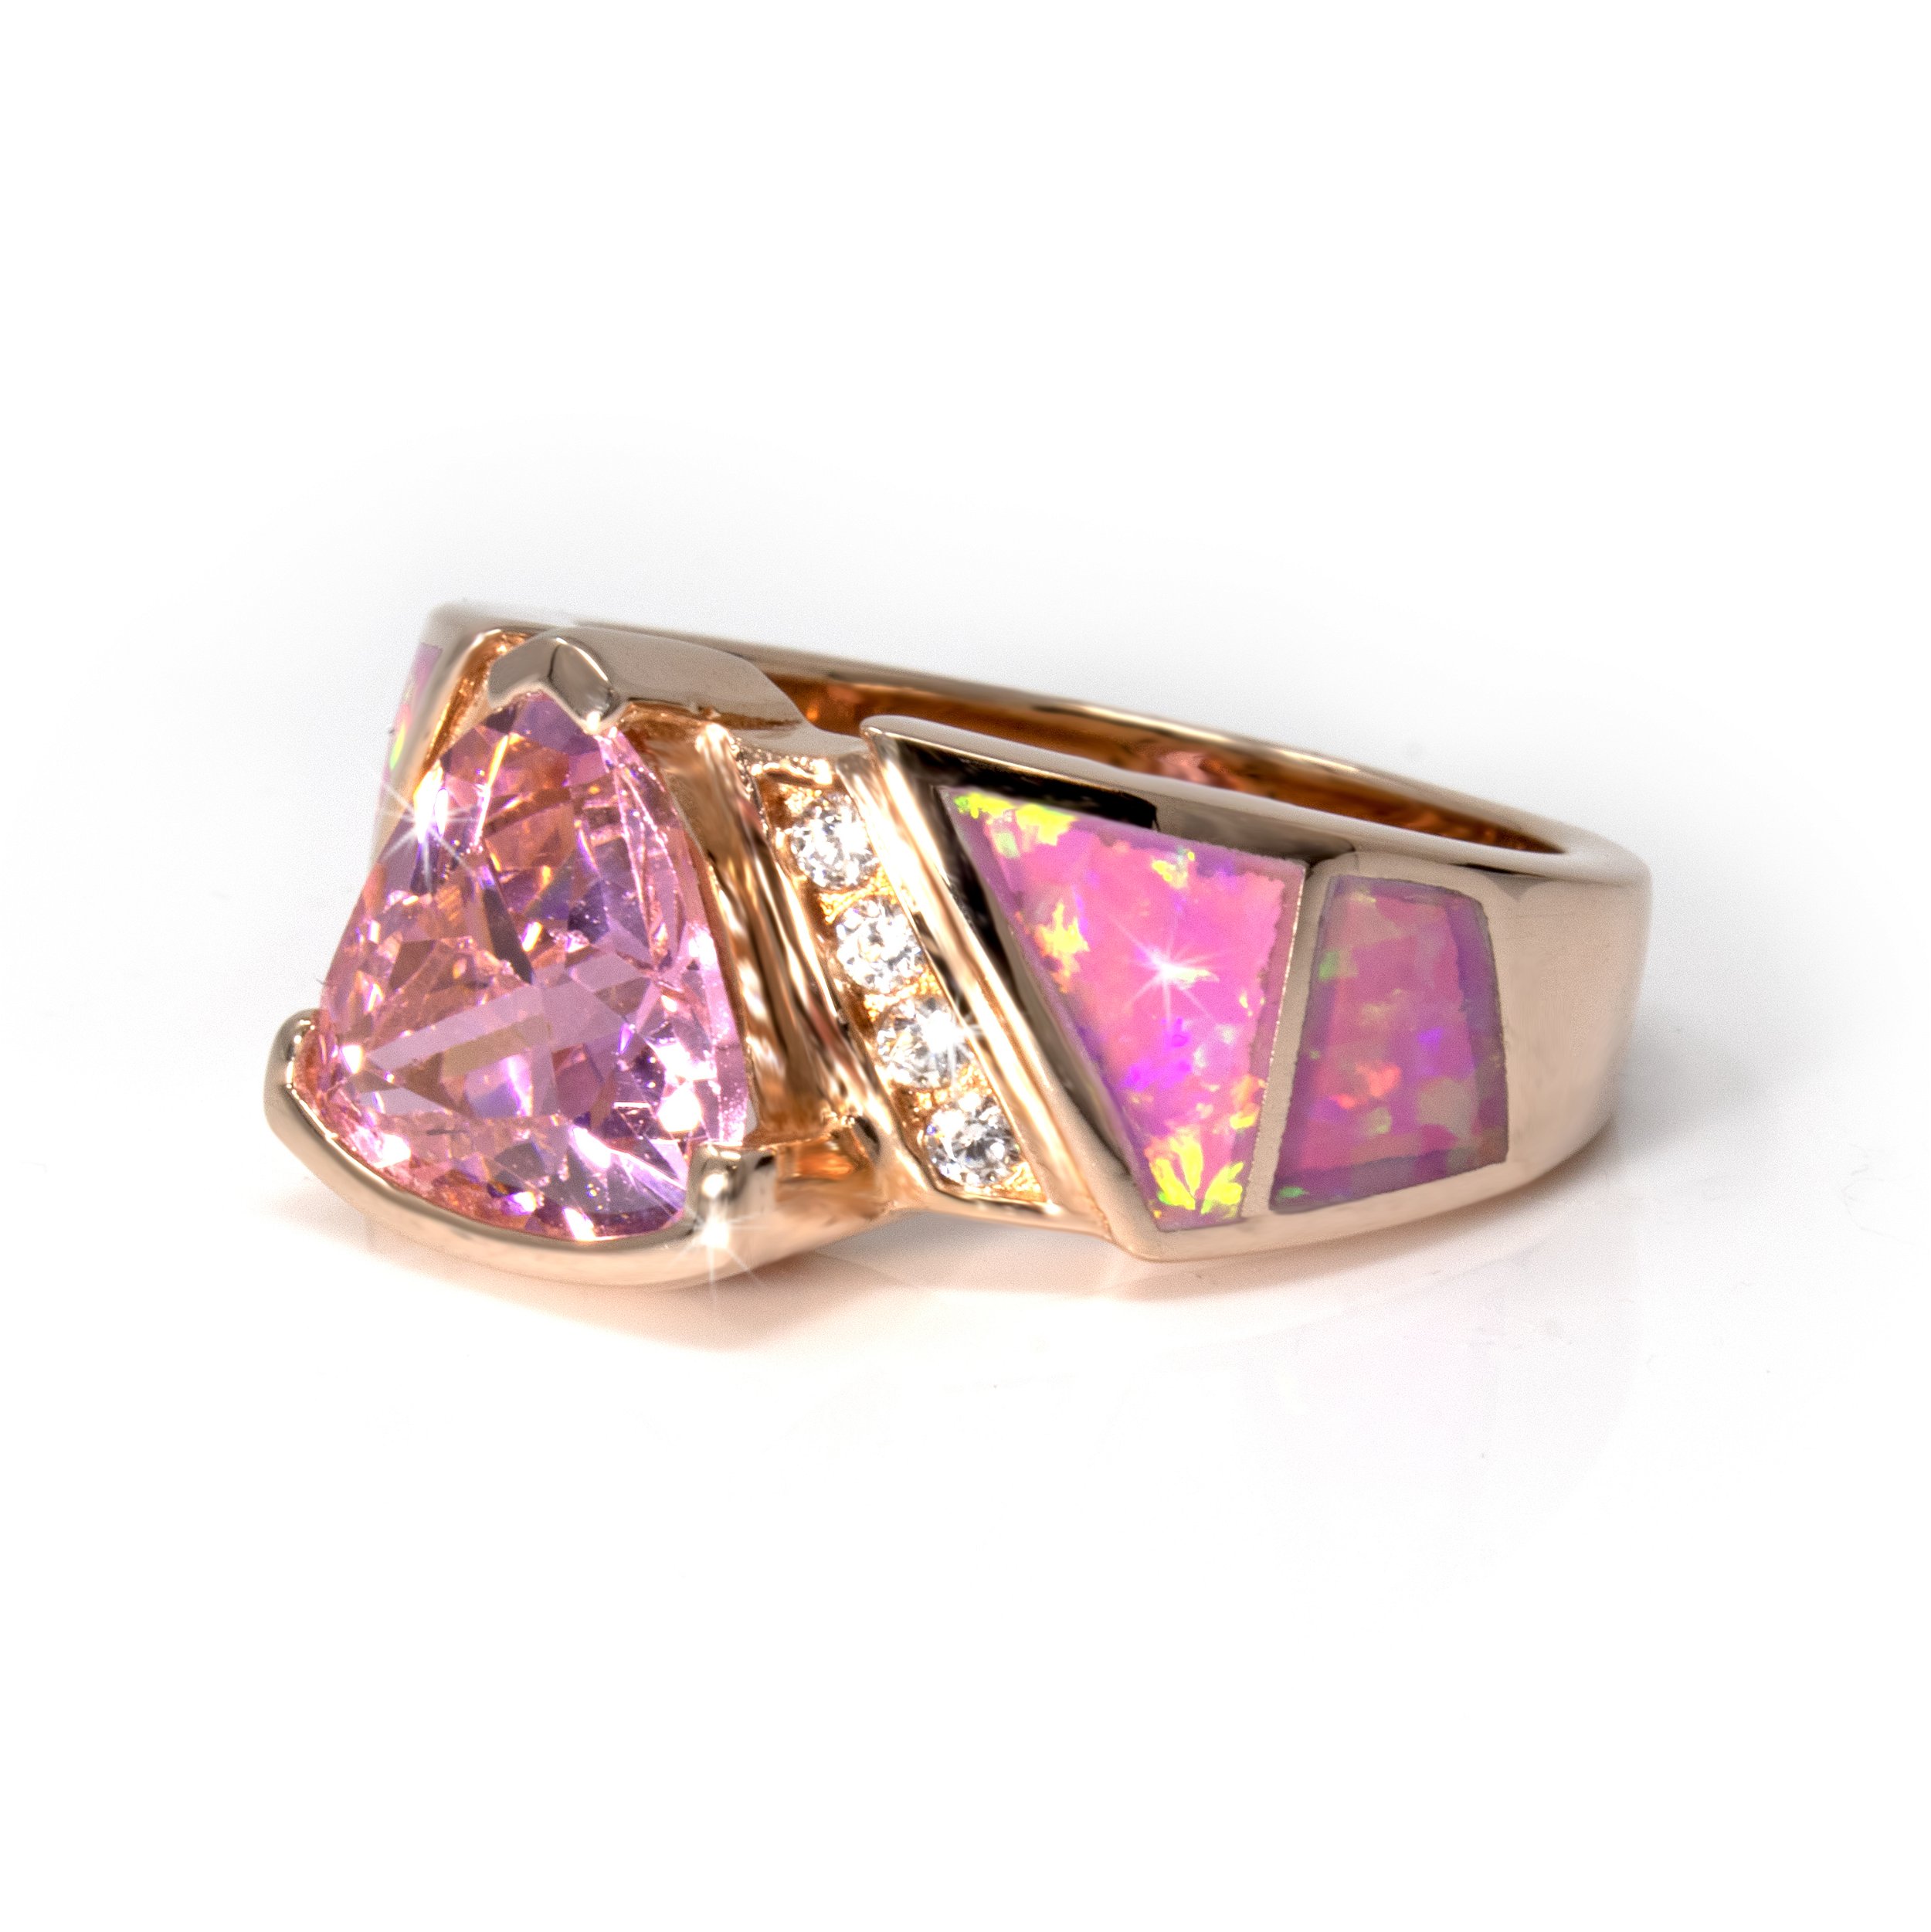 Pink Opal Ring with Rose Gold Overlay Size 10 - Inlaid Top Band With Pink Cz Trillion Set In Raised Sterling Silver Half Bezel & 2 White Cz Trios On Side